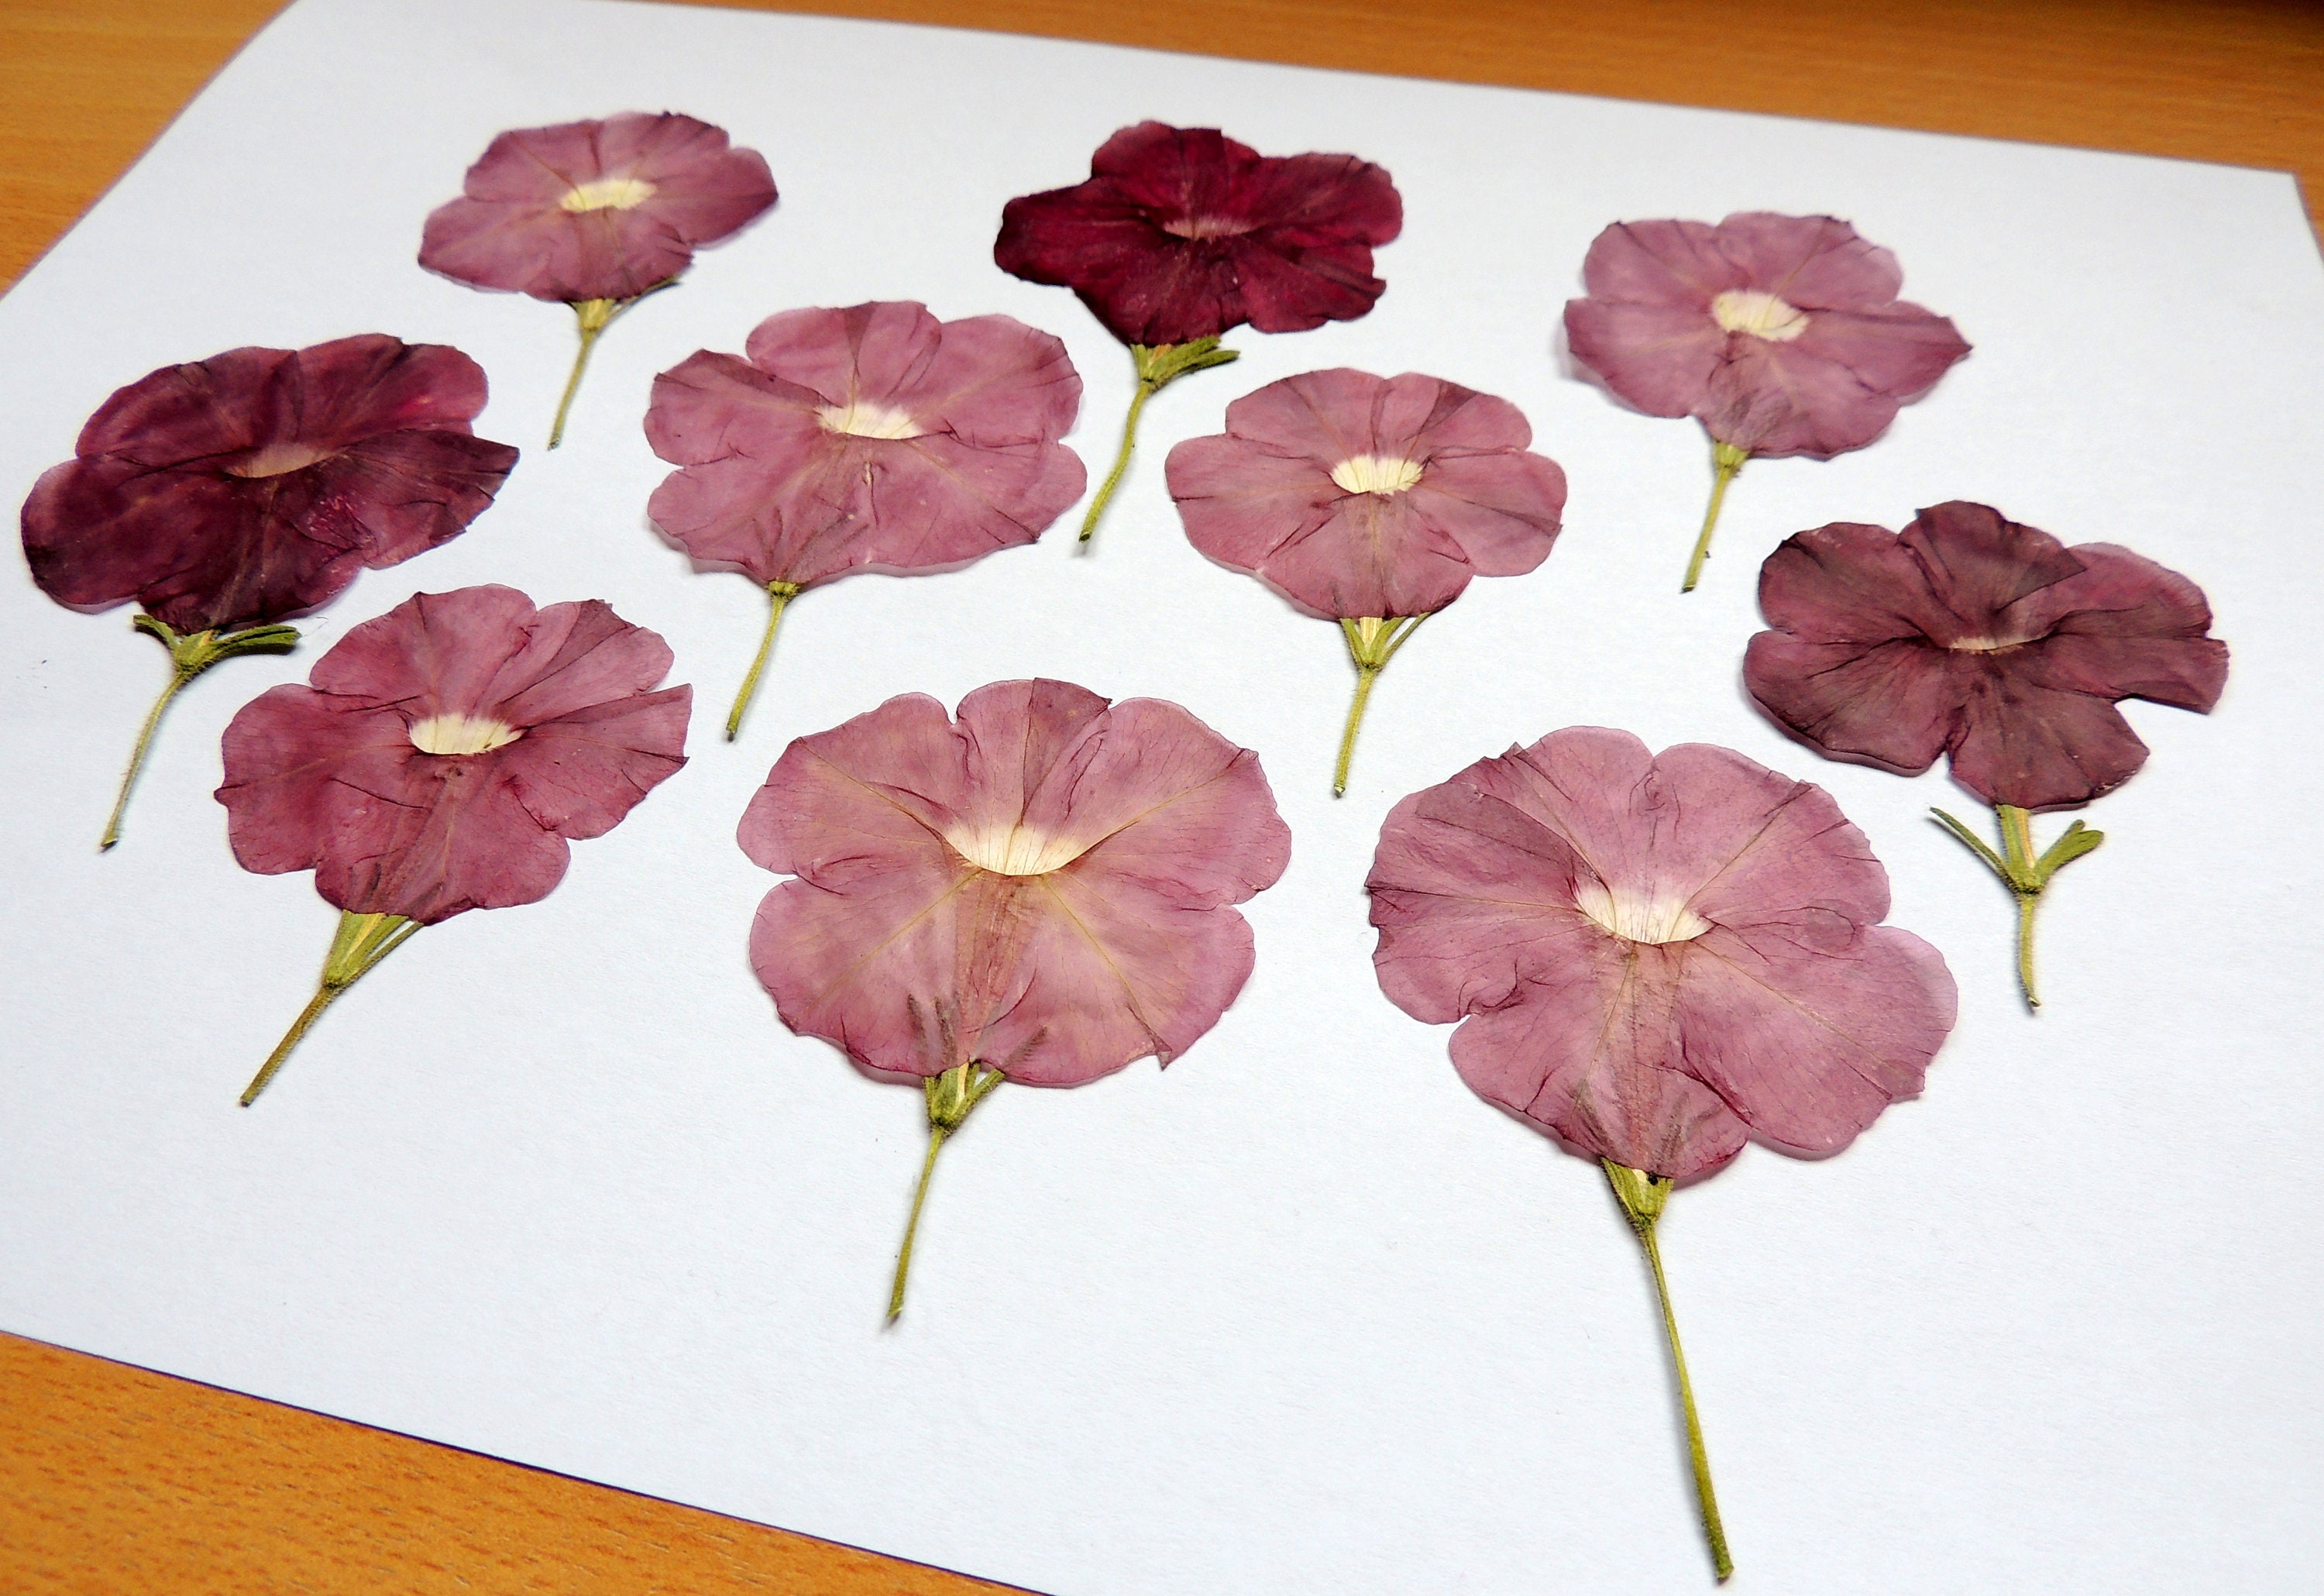 40 Pieces of Static Flowers, Dried Flowers , for Crafts, Cards, Herbarium,  Resin, Scrapbooking. 125 